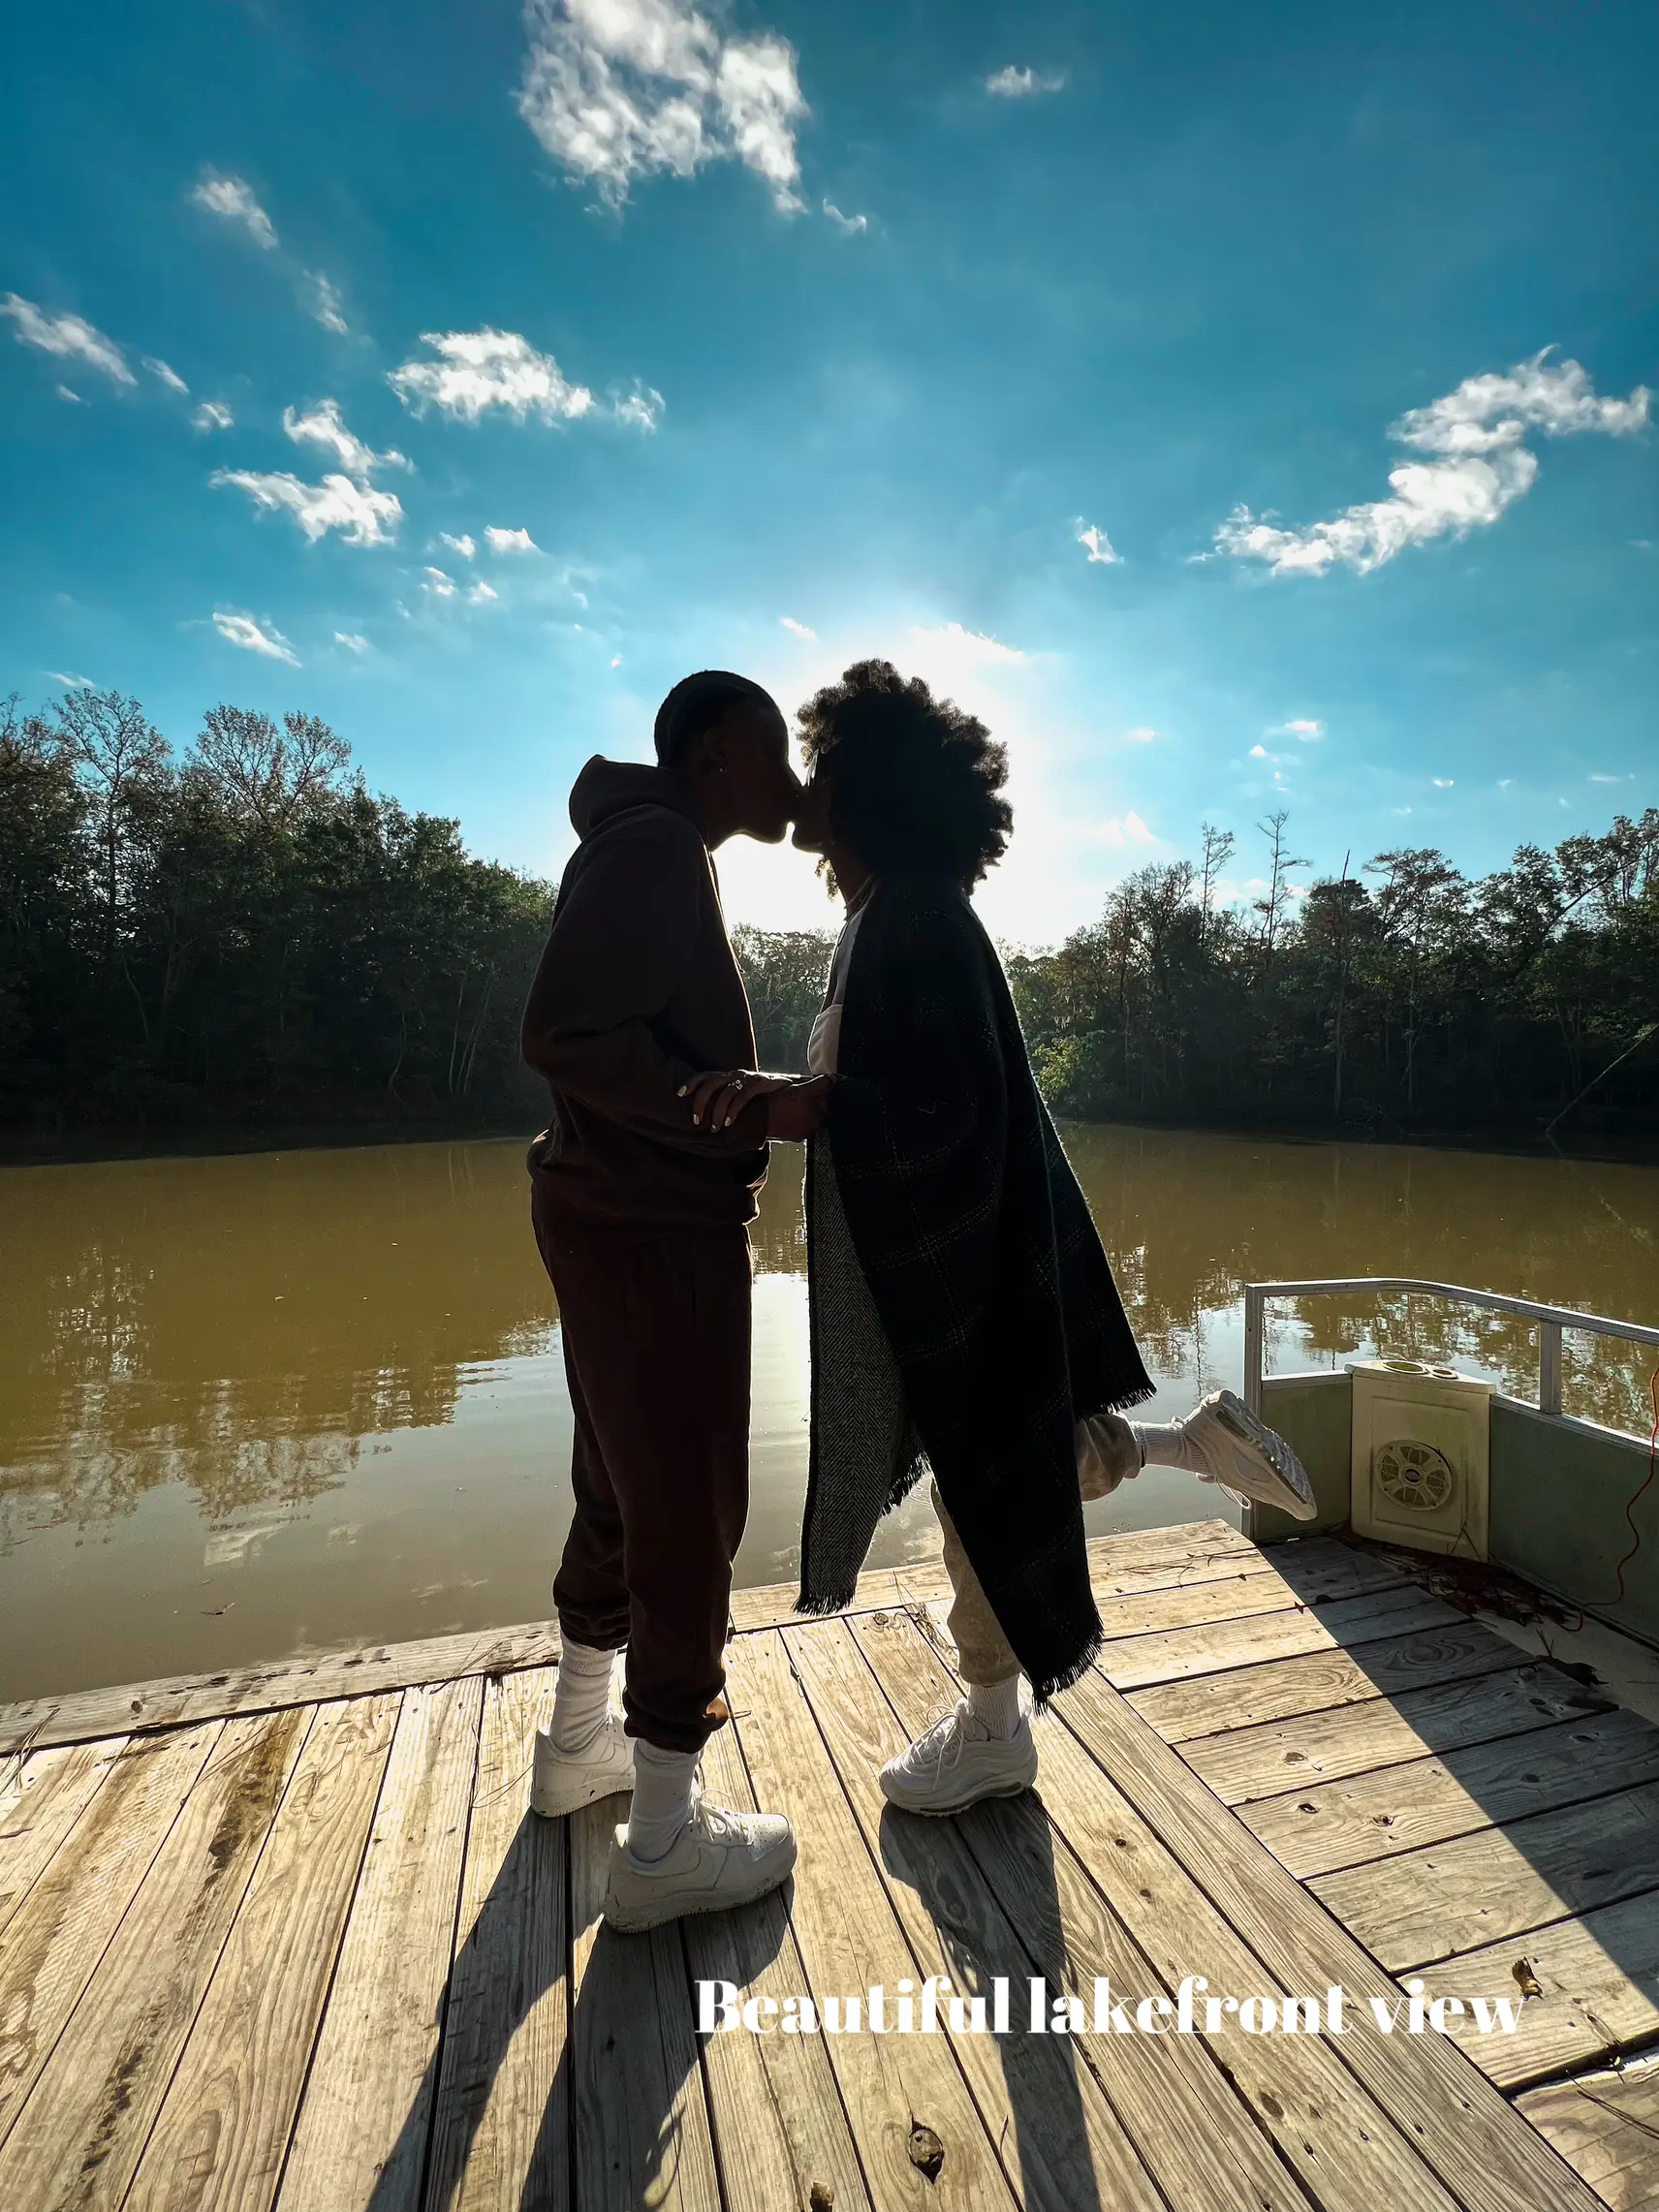  Two people kissing in front of a lake.